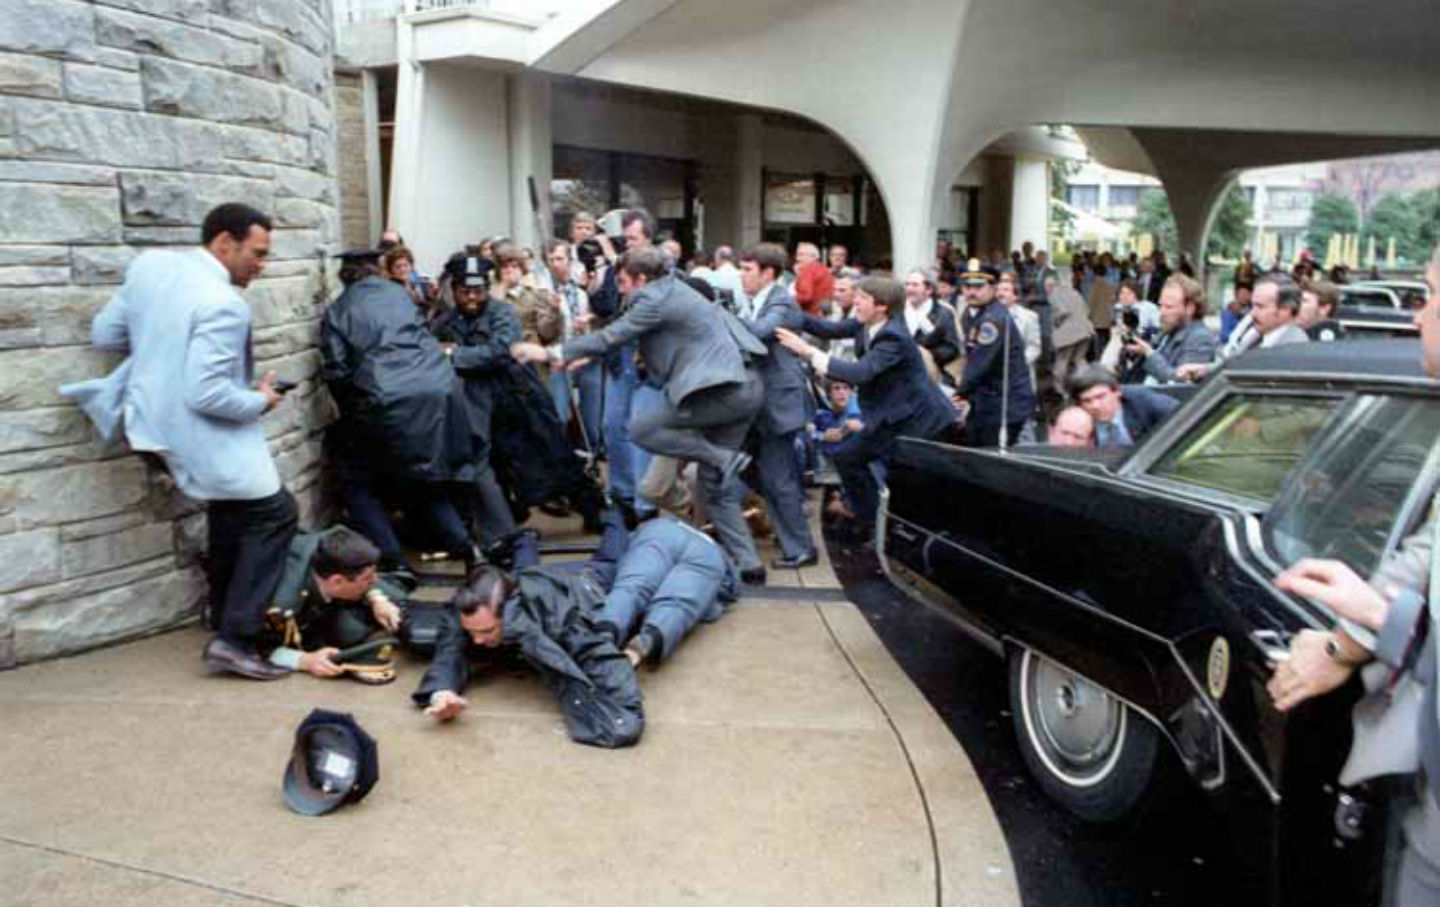 March 30, 1981: Ronald Reagan Is Shot